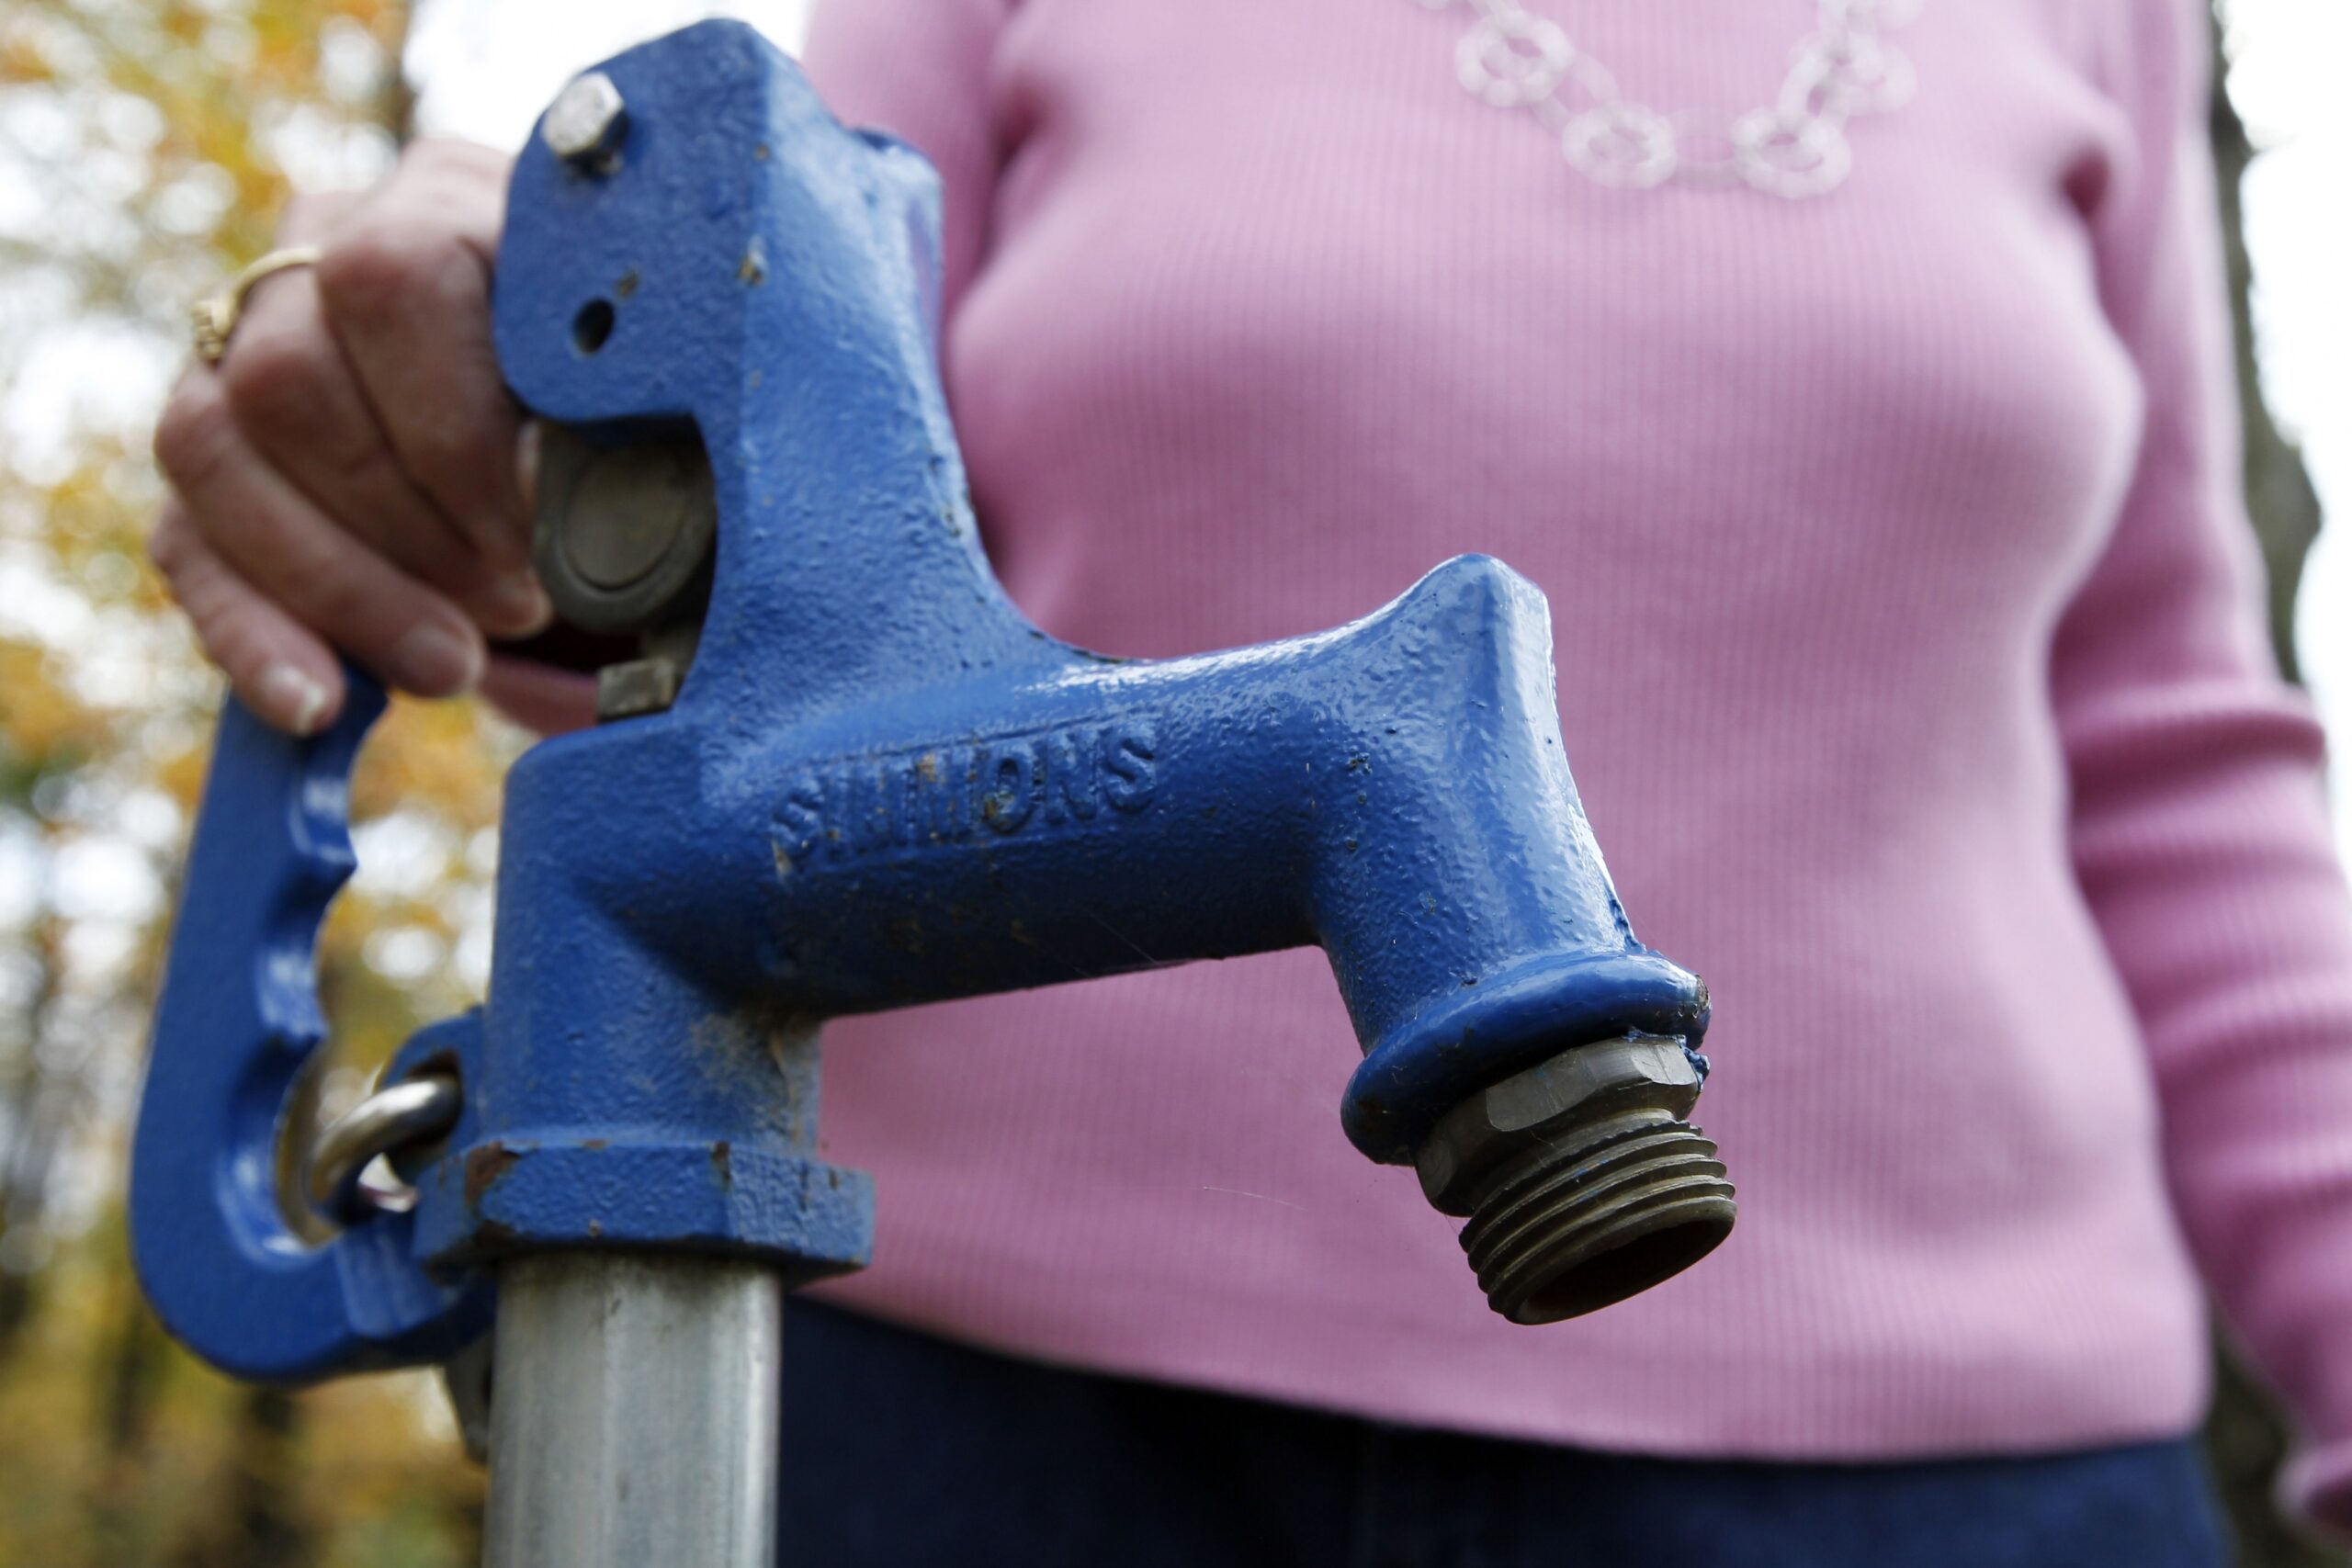 Jean Carter with the water spigot used to test her well water